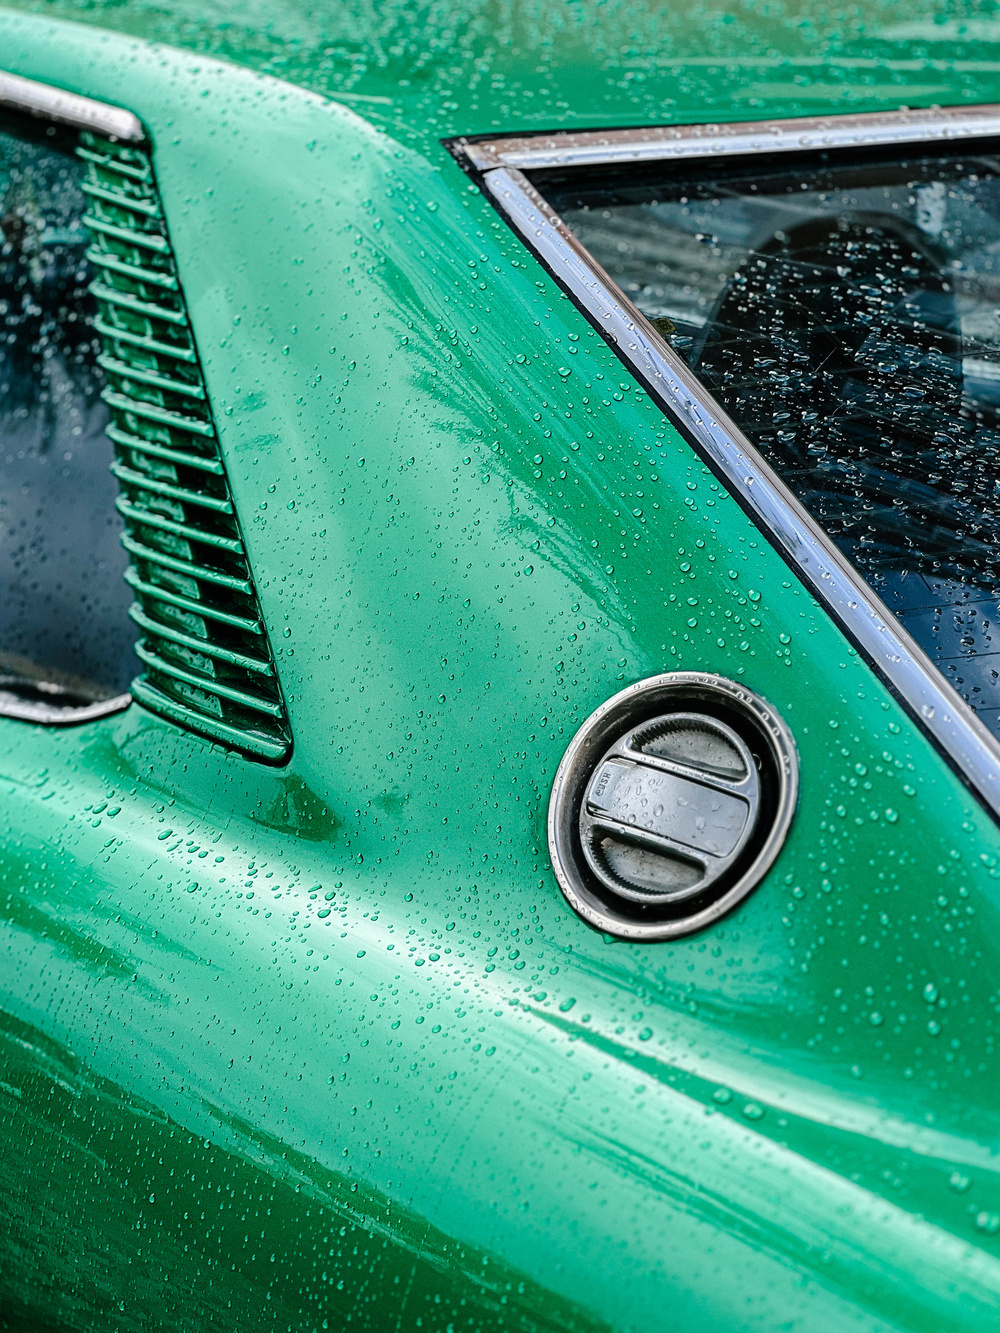 Close-up of a teal car with raindrops on the surface, featuring a visible side vent and a car manufacturer&rsquo;s logo badge.